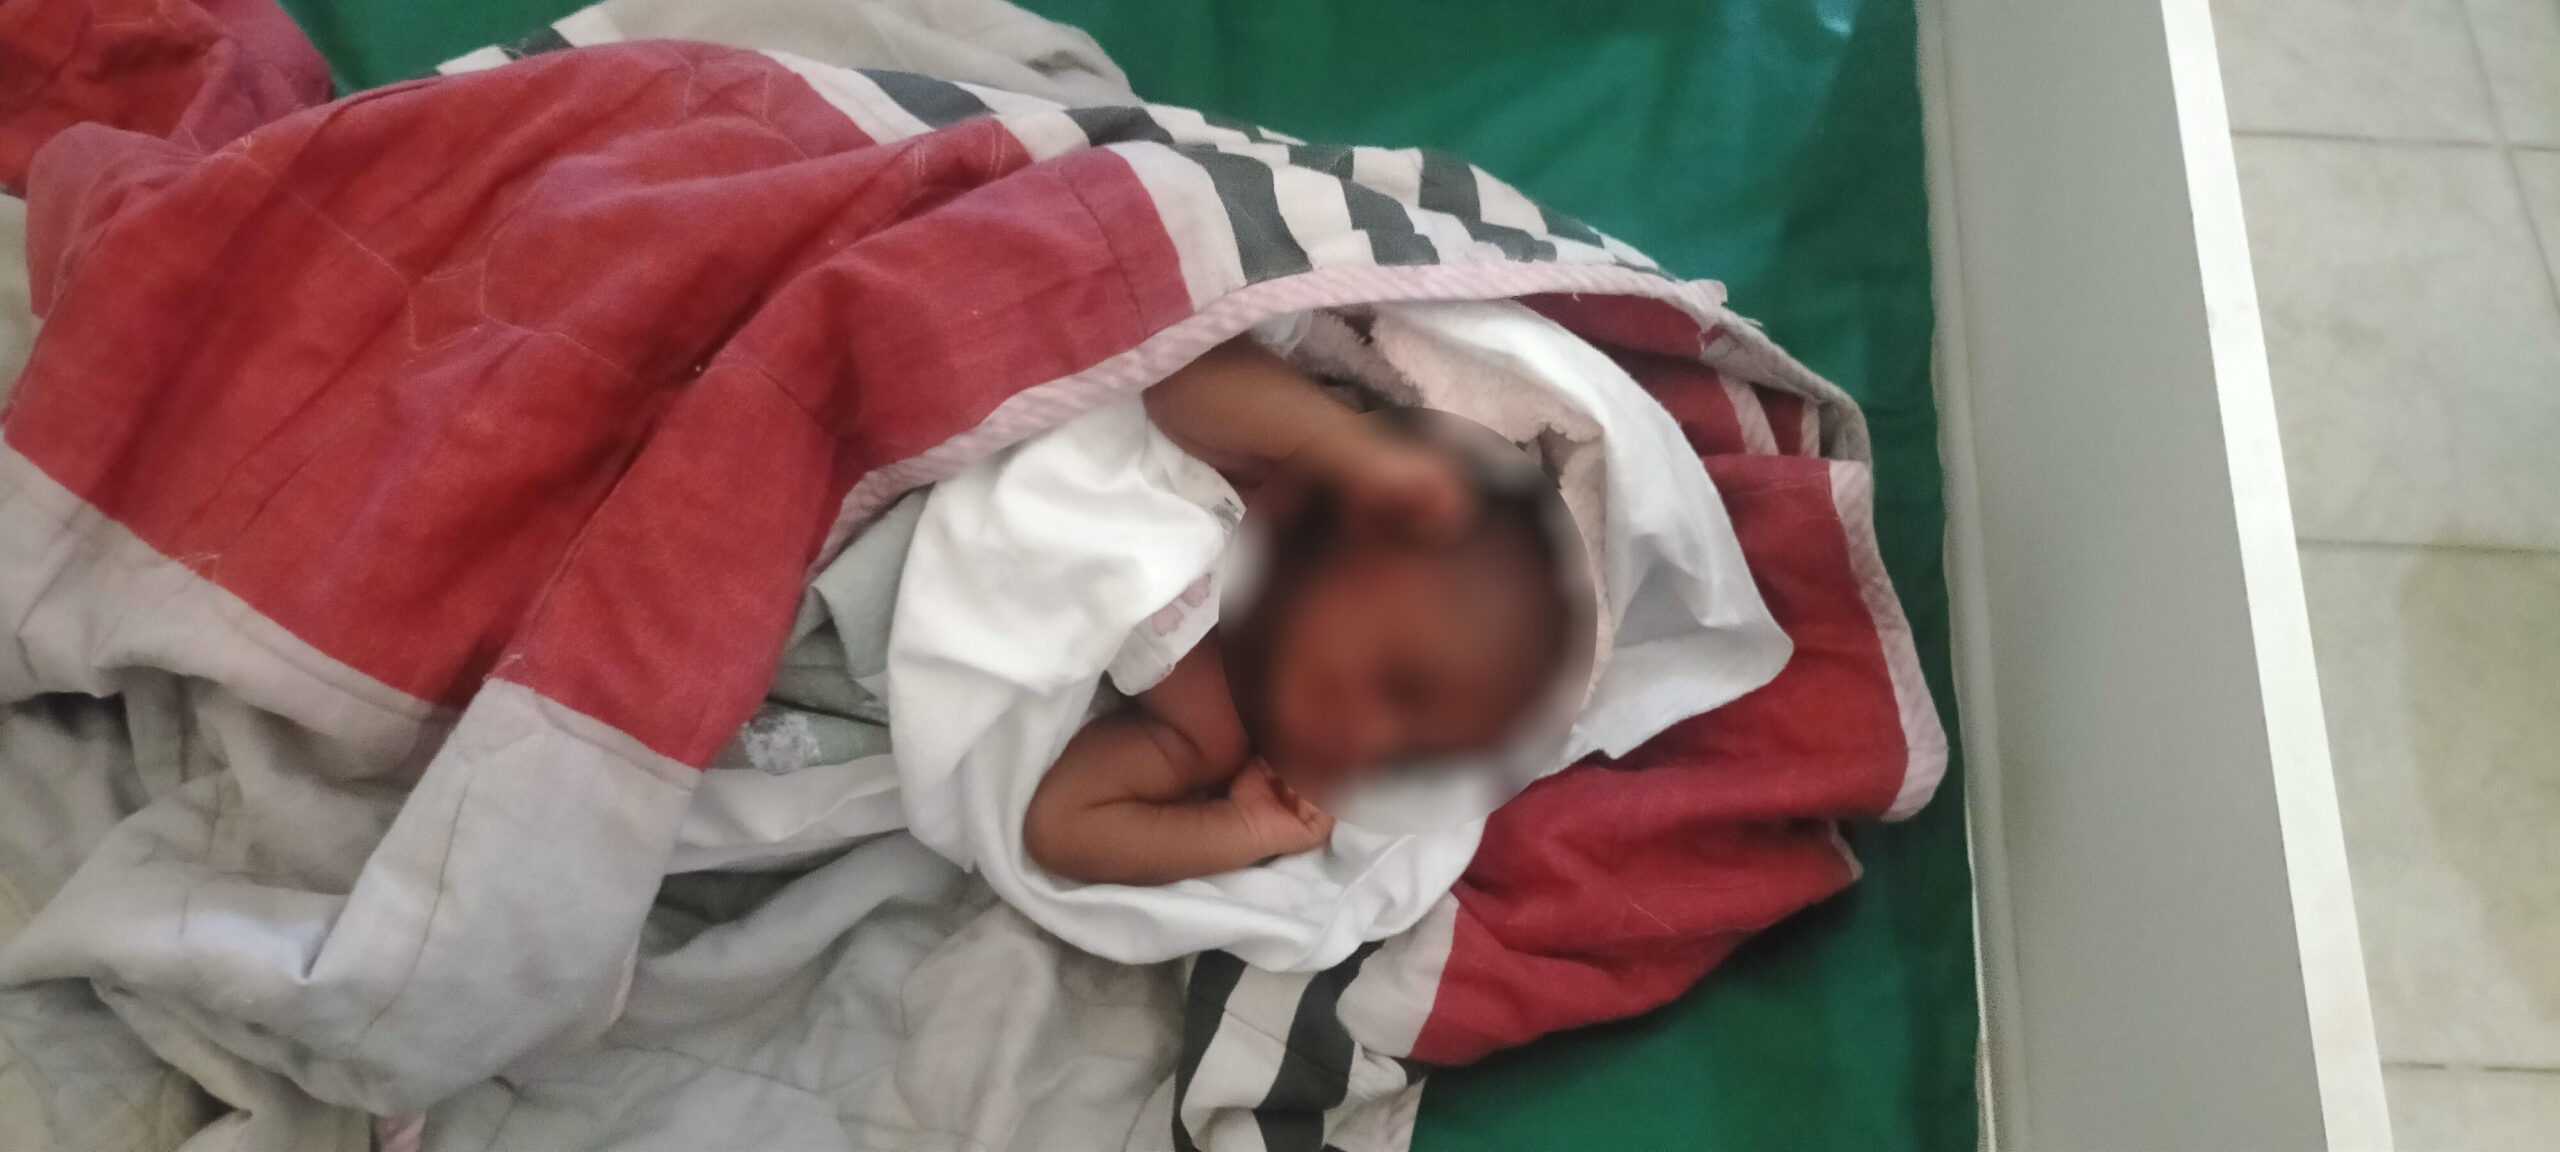 Mother arrested after leaving newborn baby unattended for six hours in hospital